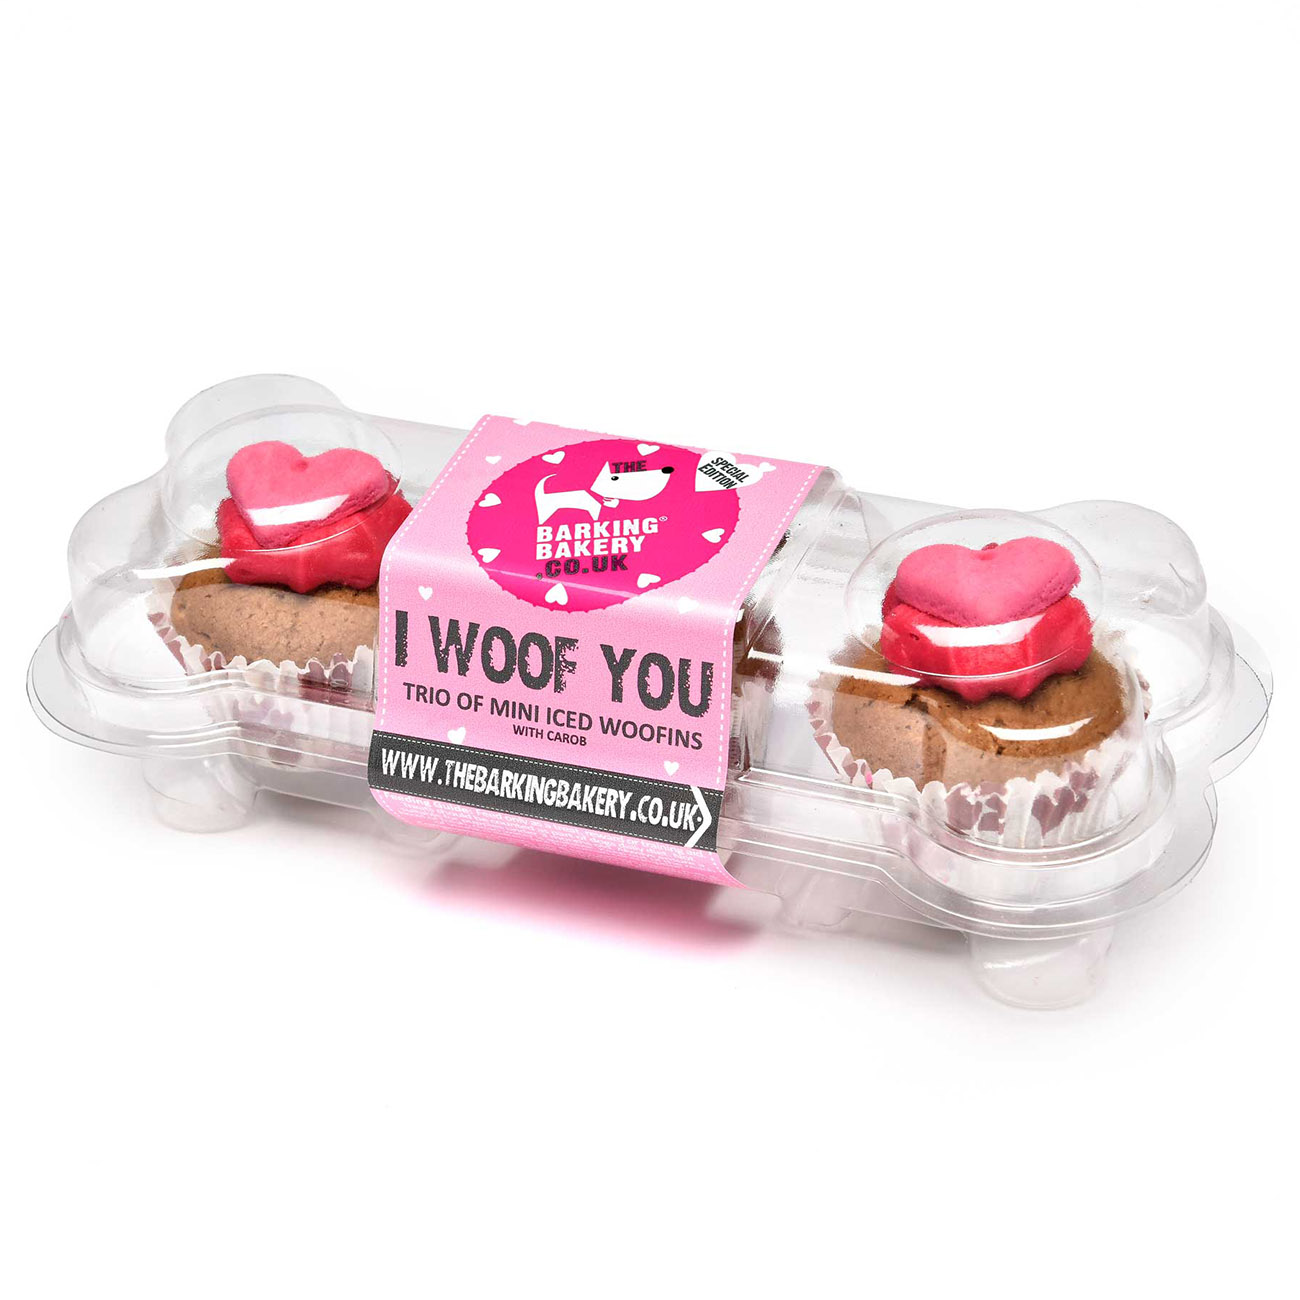 I WOOF YOU Cupcakes